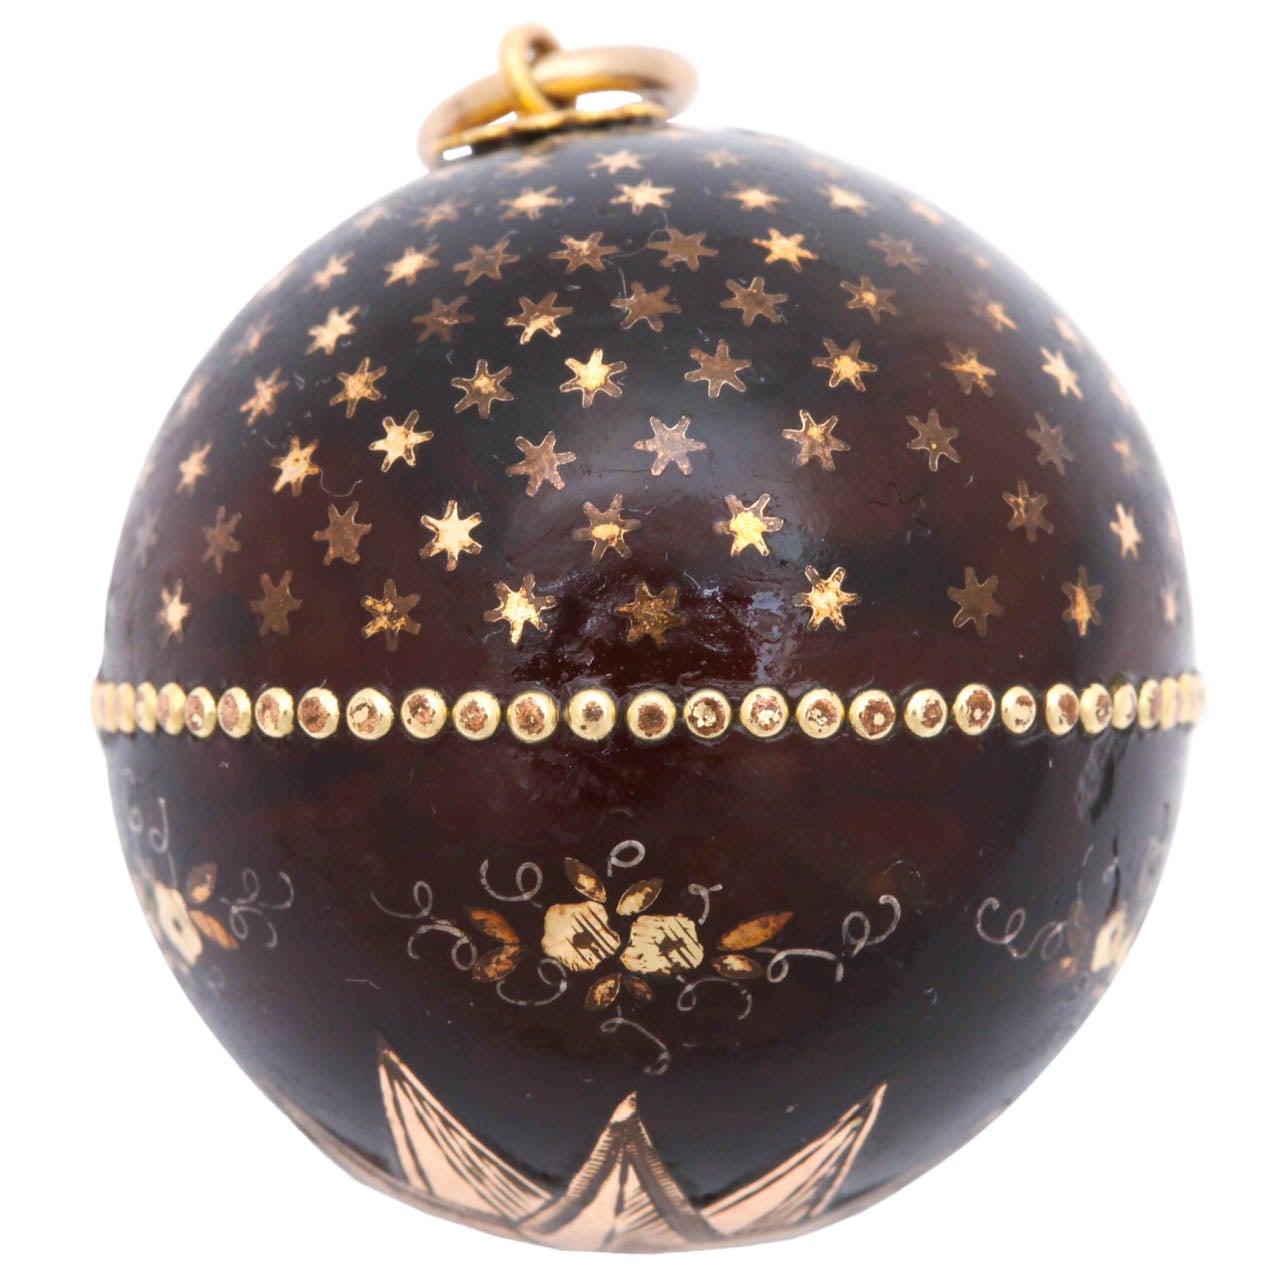 Beads of Gold and Heavenly Stars and Flowers on a Pique Ball Pendant